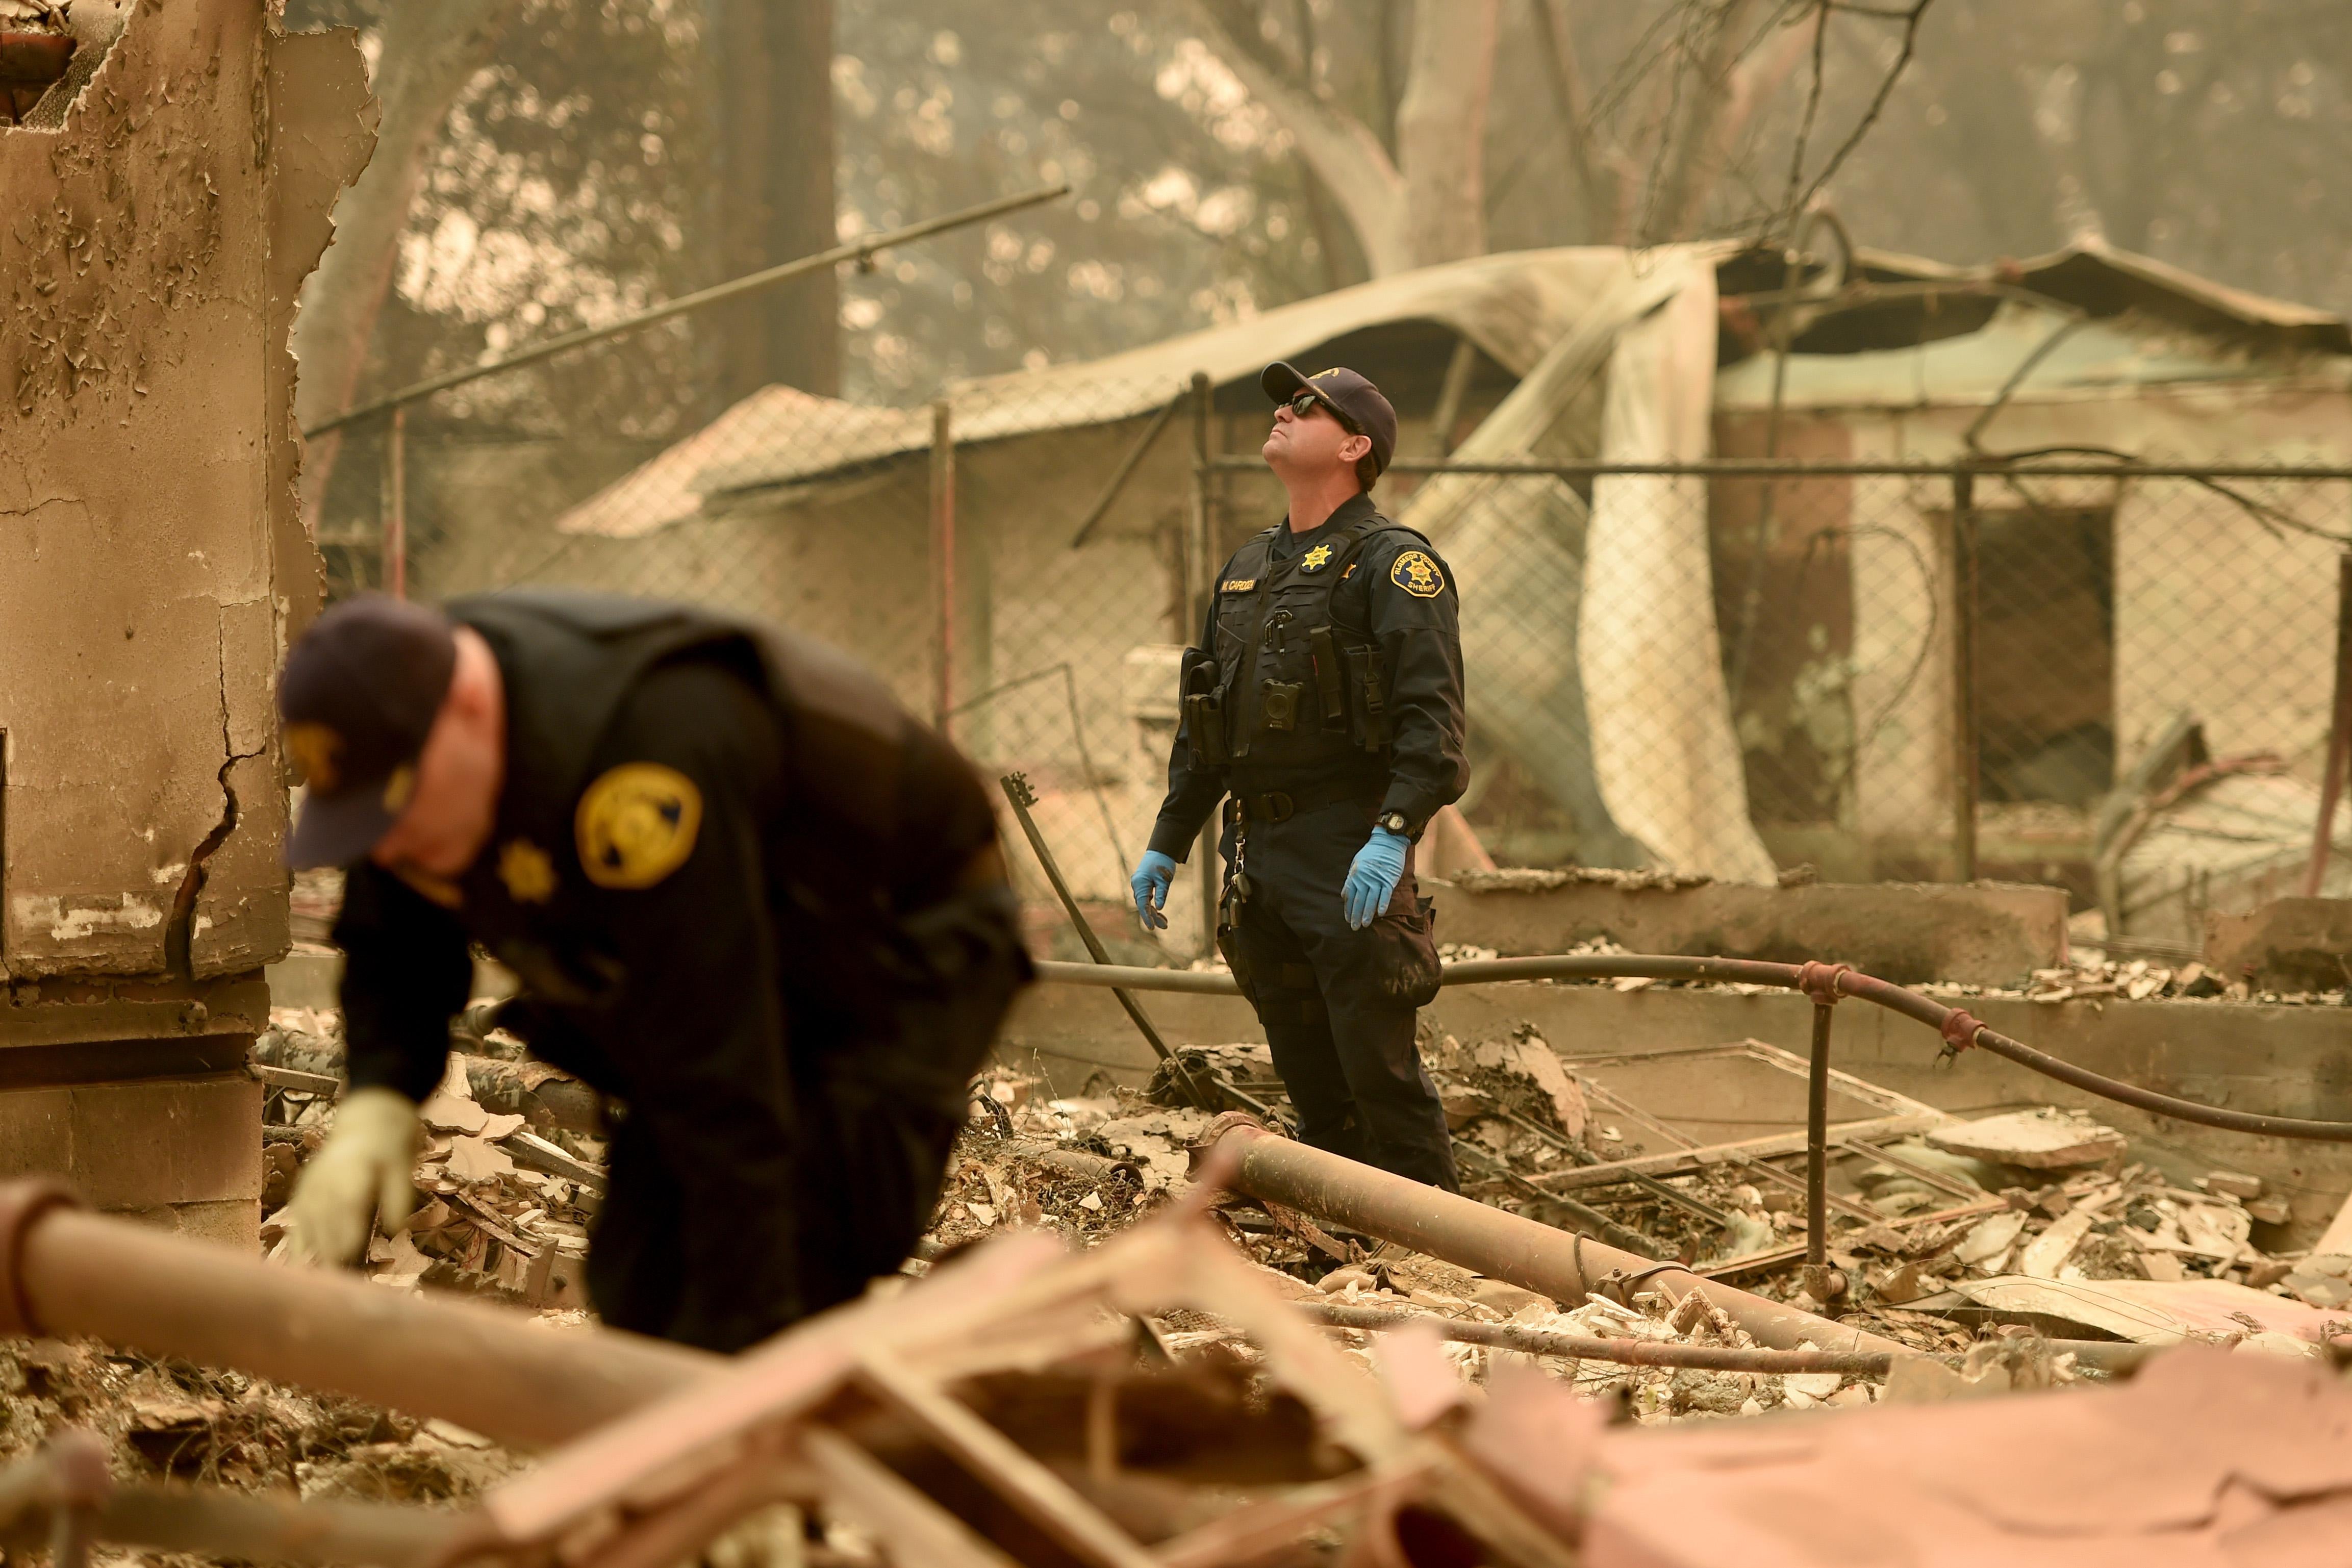 In the burned wreckage of a home, two officers wearing gloves look through the rubble. A layer of ash coats everything.